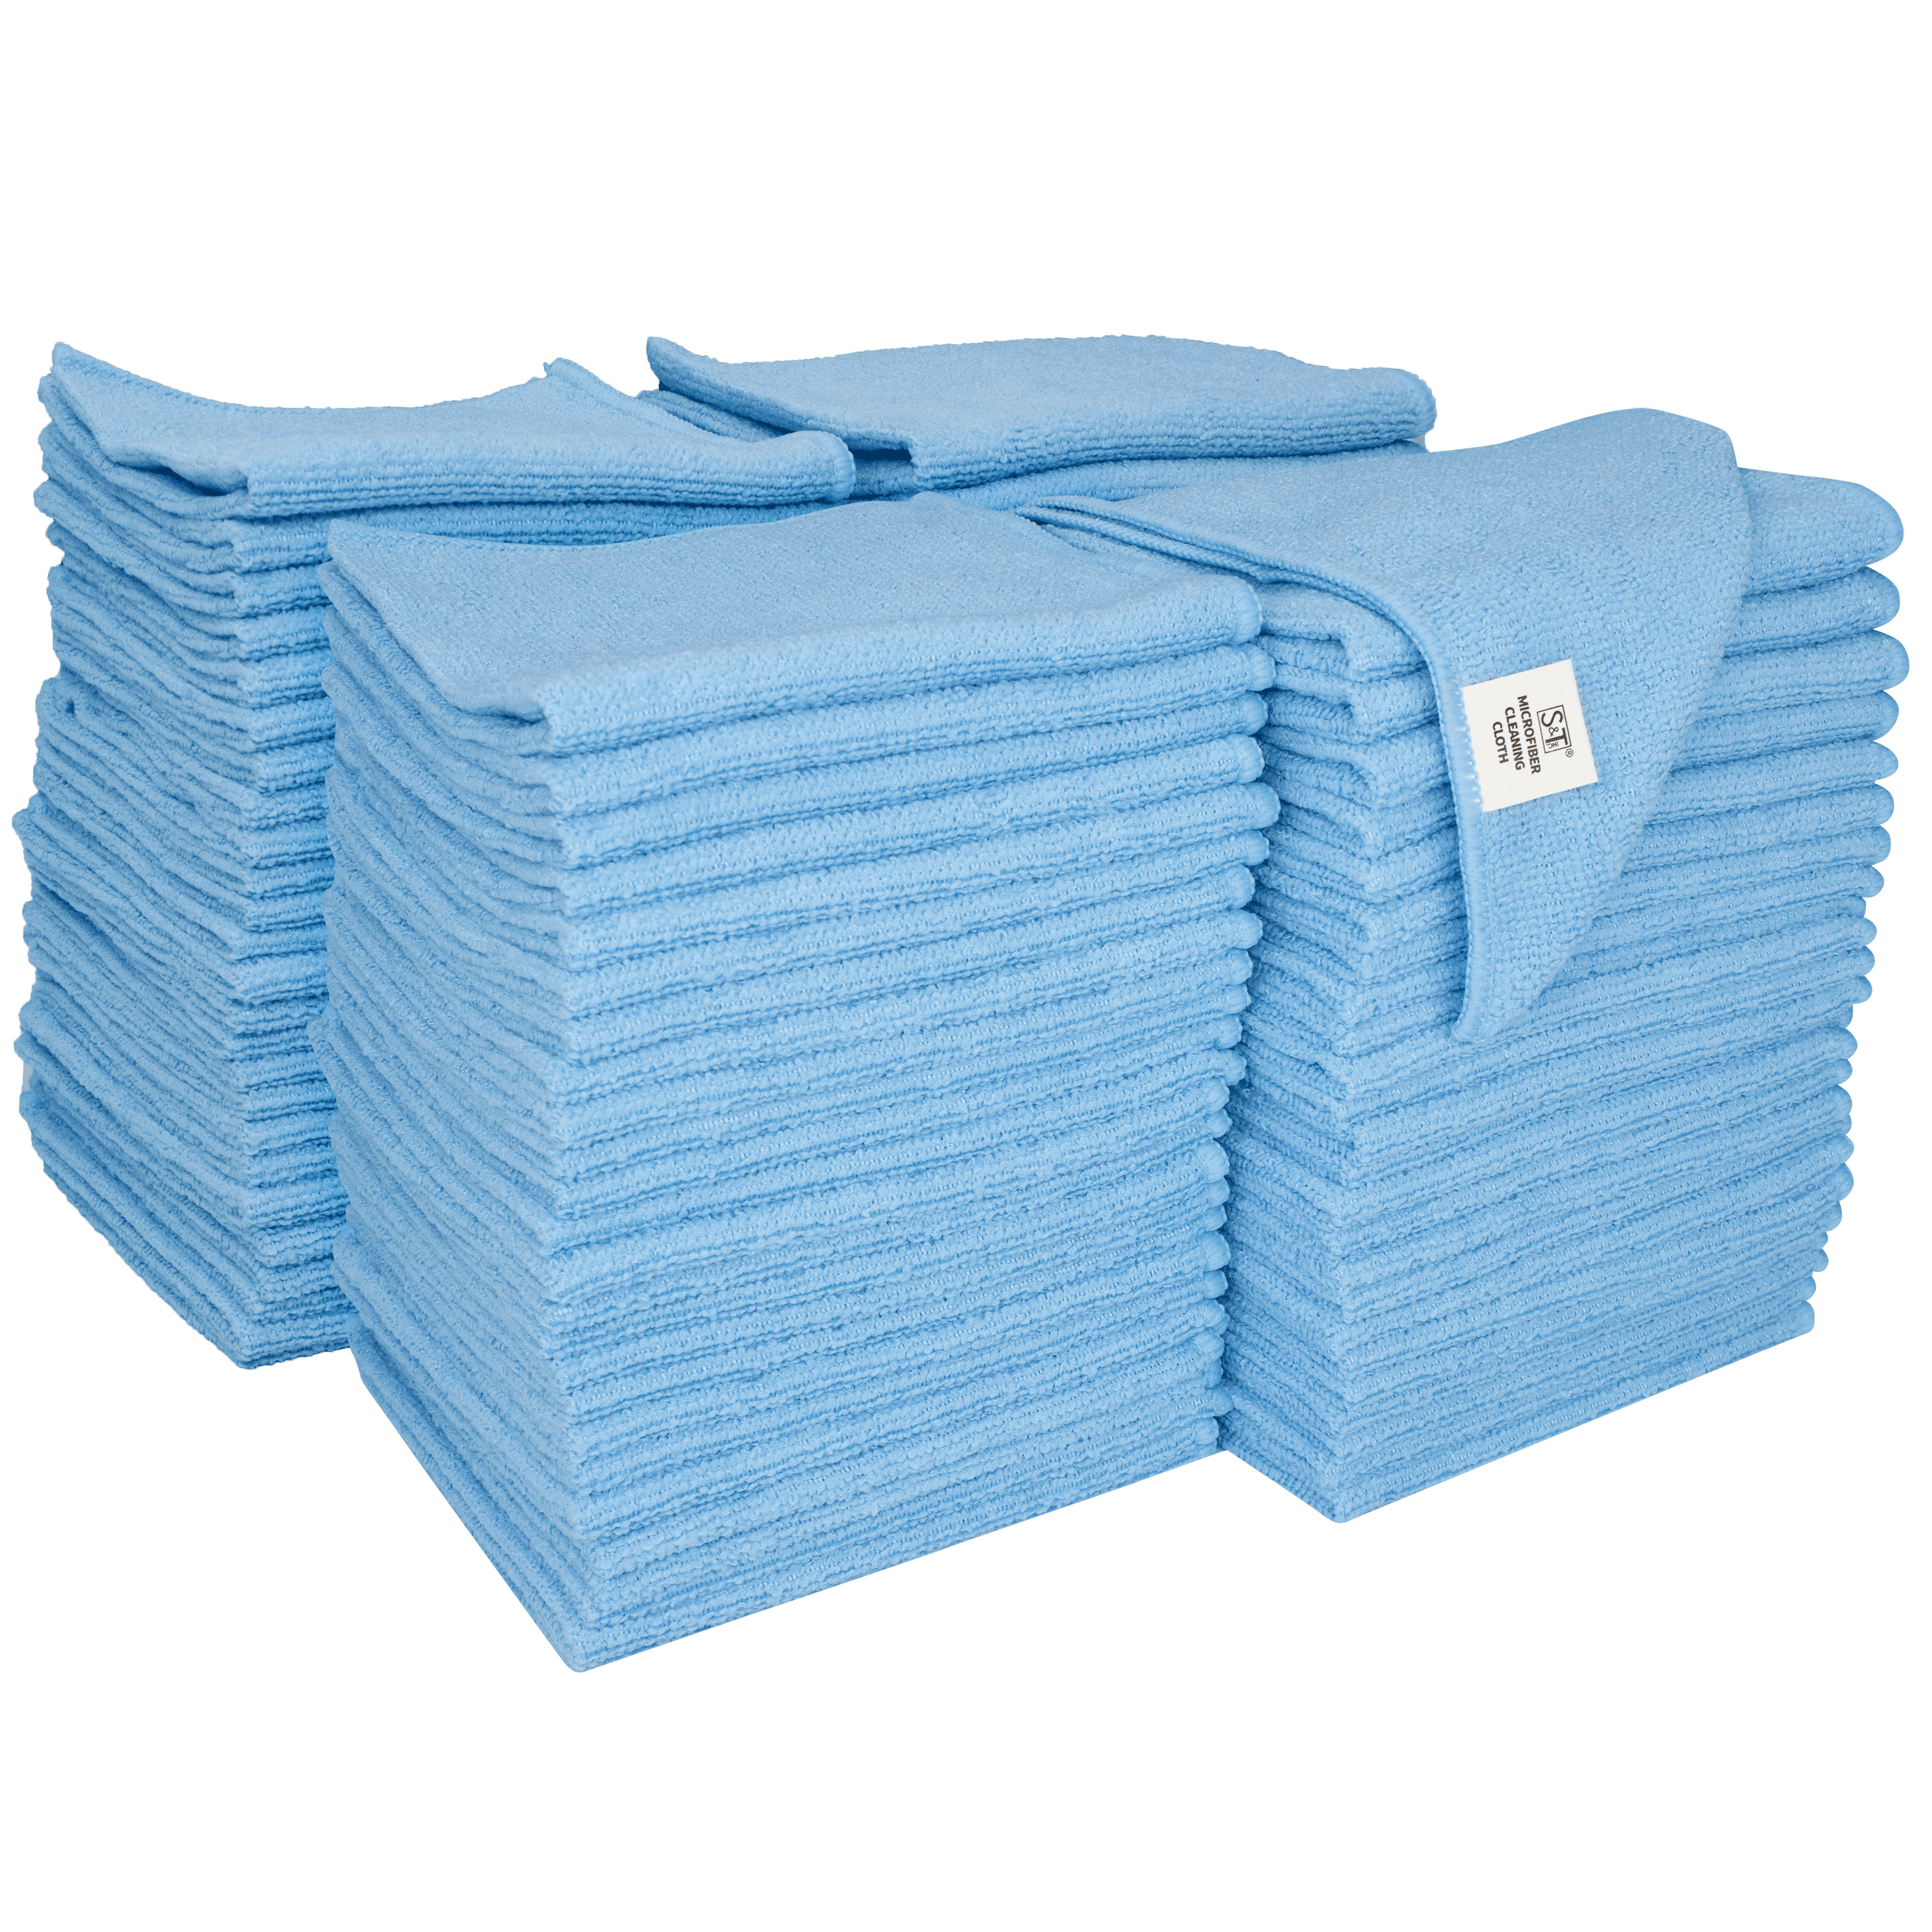 HOMEXCEL Microfiber Cleaning Cloths,All-Purpose Kitchen Microfiber  Towels,Reusable Highly Absorbent - Towels & Washcloths, Facebook  Marketplace